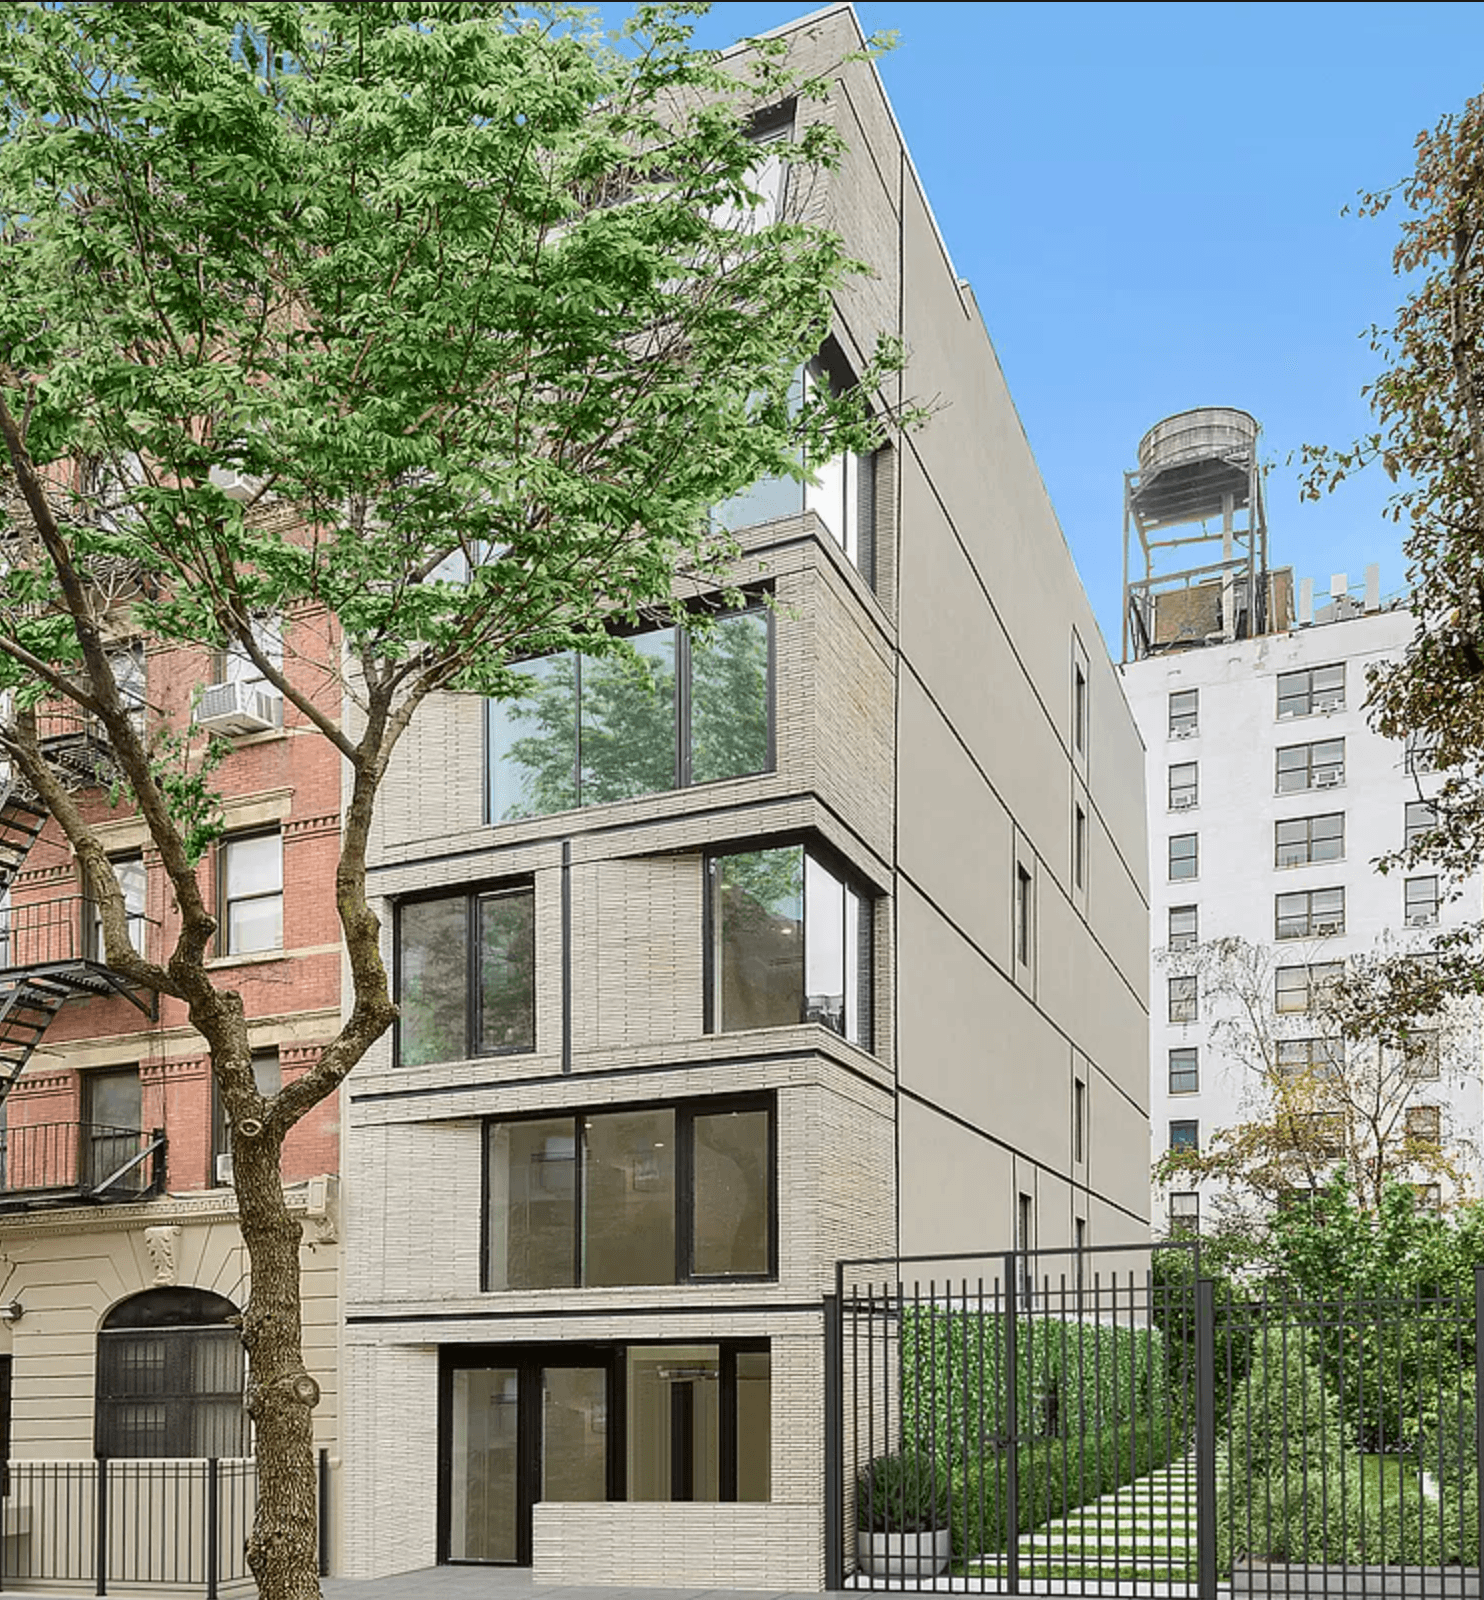 On July 19th, these two new Manhattan Condos will be sold at Luxury AUCTION !